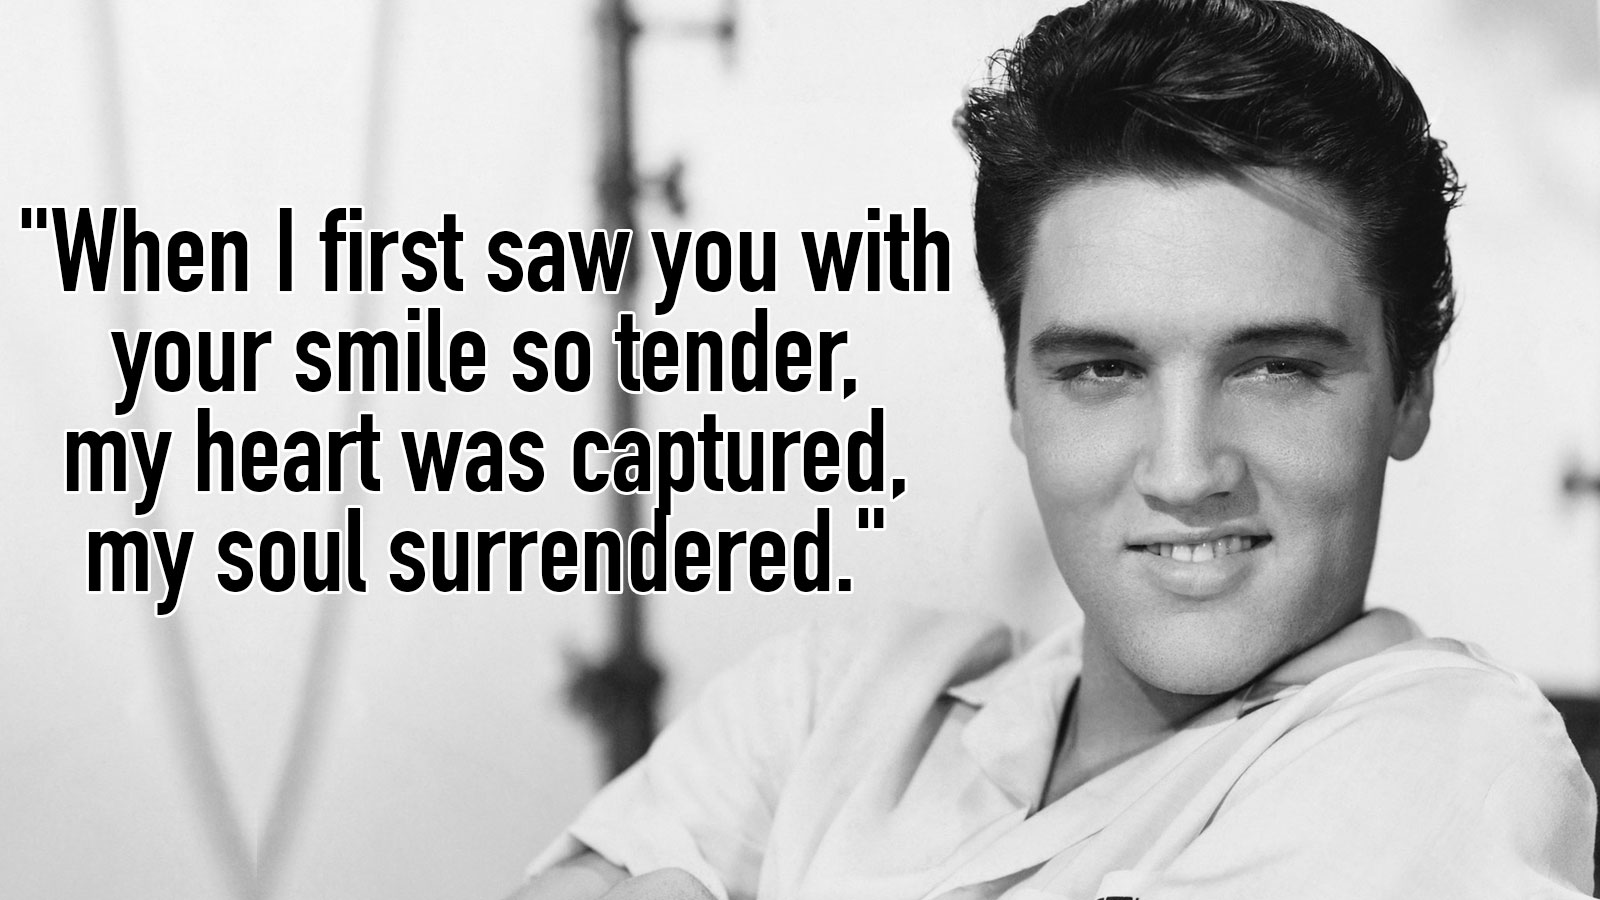 Can You Guess Which Elvis Presley Song This Lyric Is From? 16